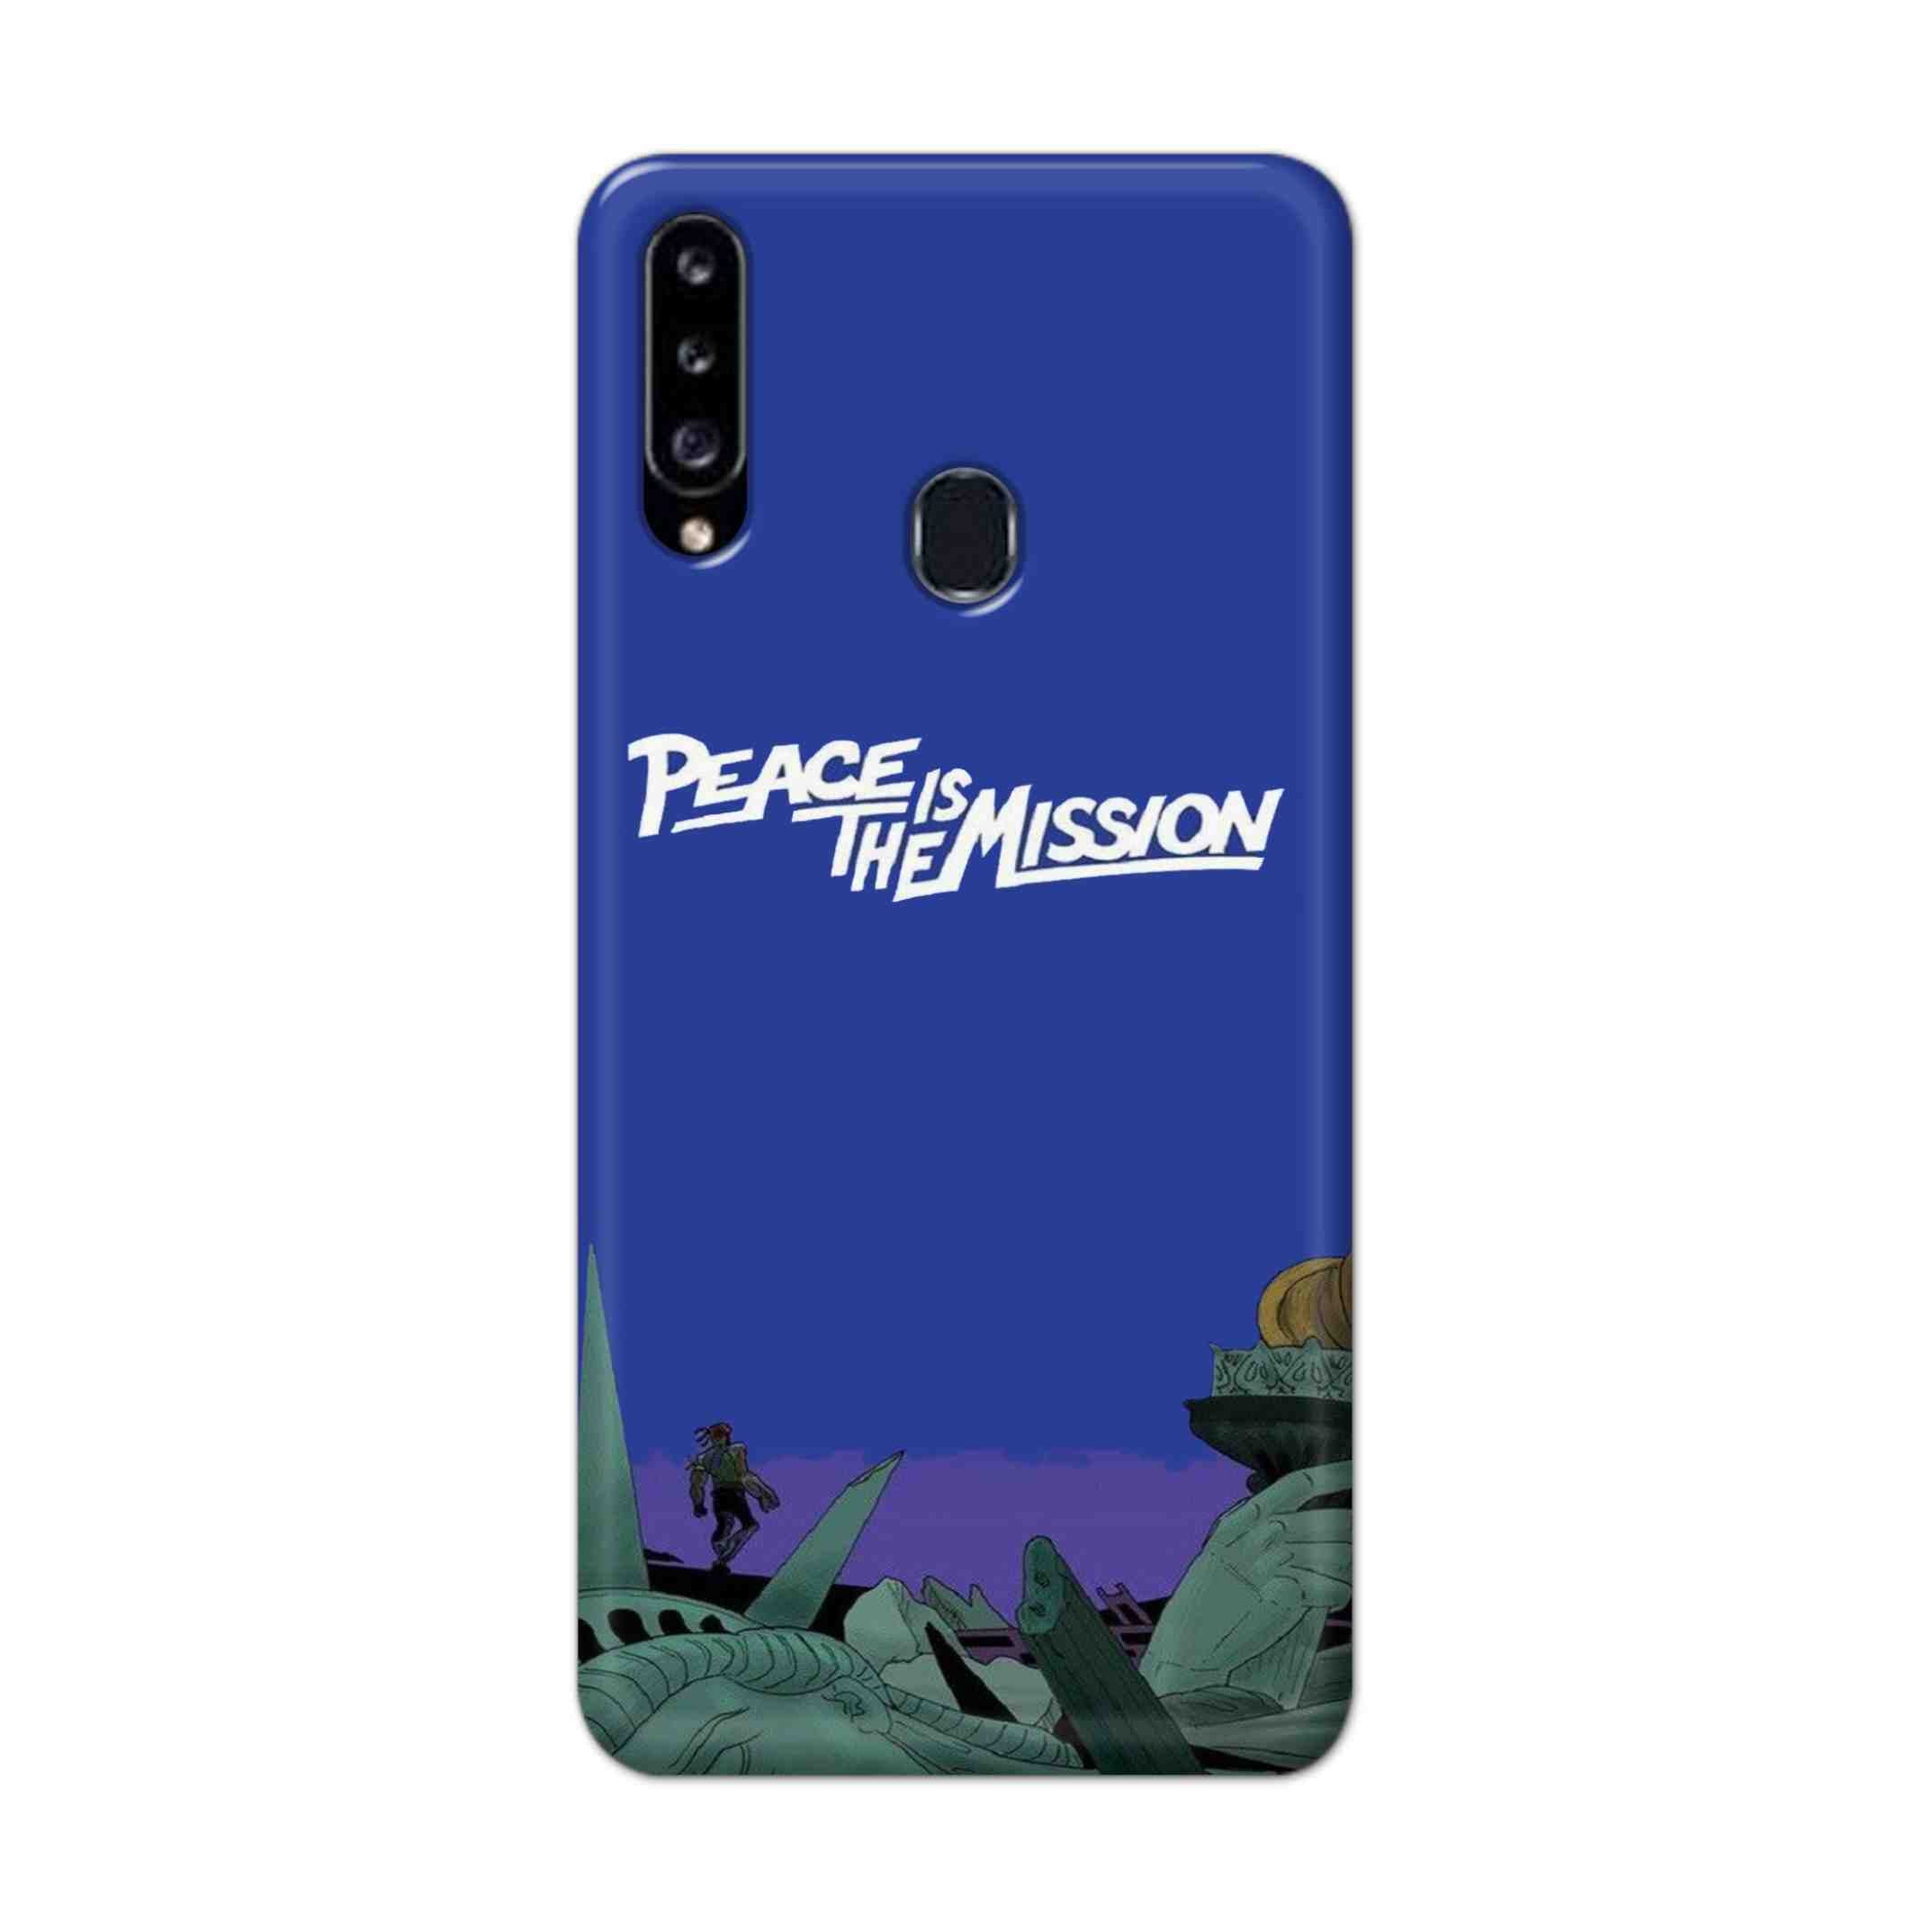 Buy Peace Is The Misson Hard Back Mobile Phone Case Cover For Samsung Galaxy A21 Online